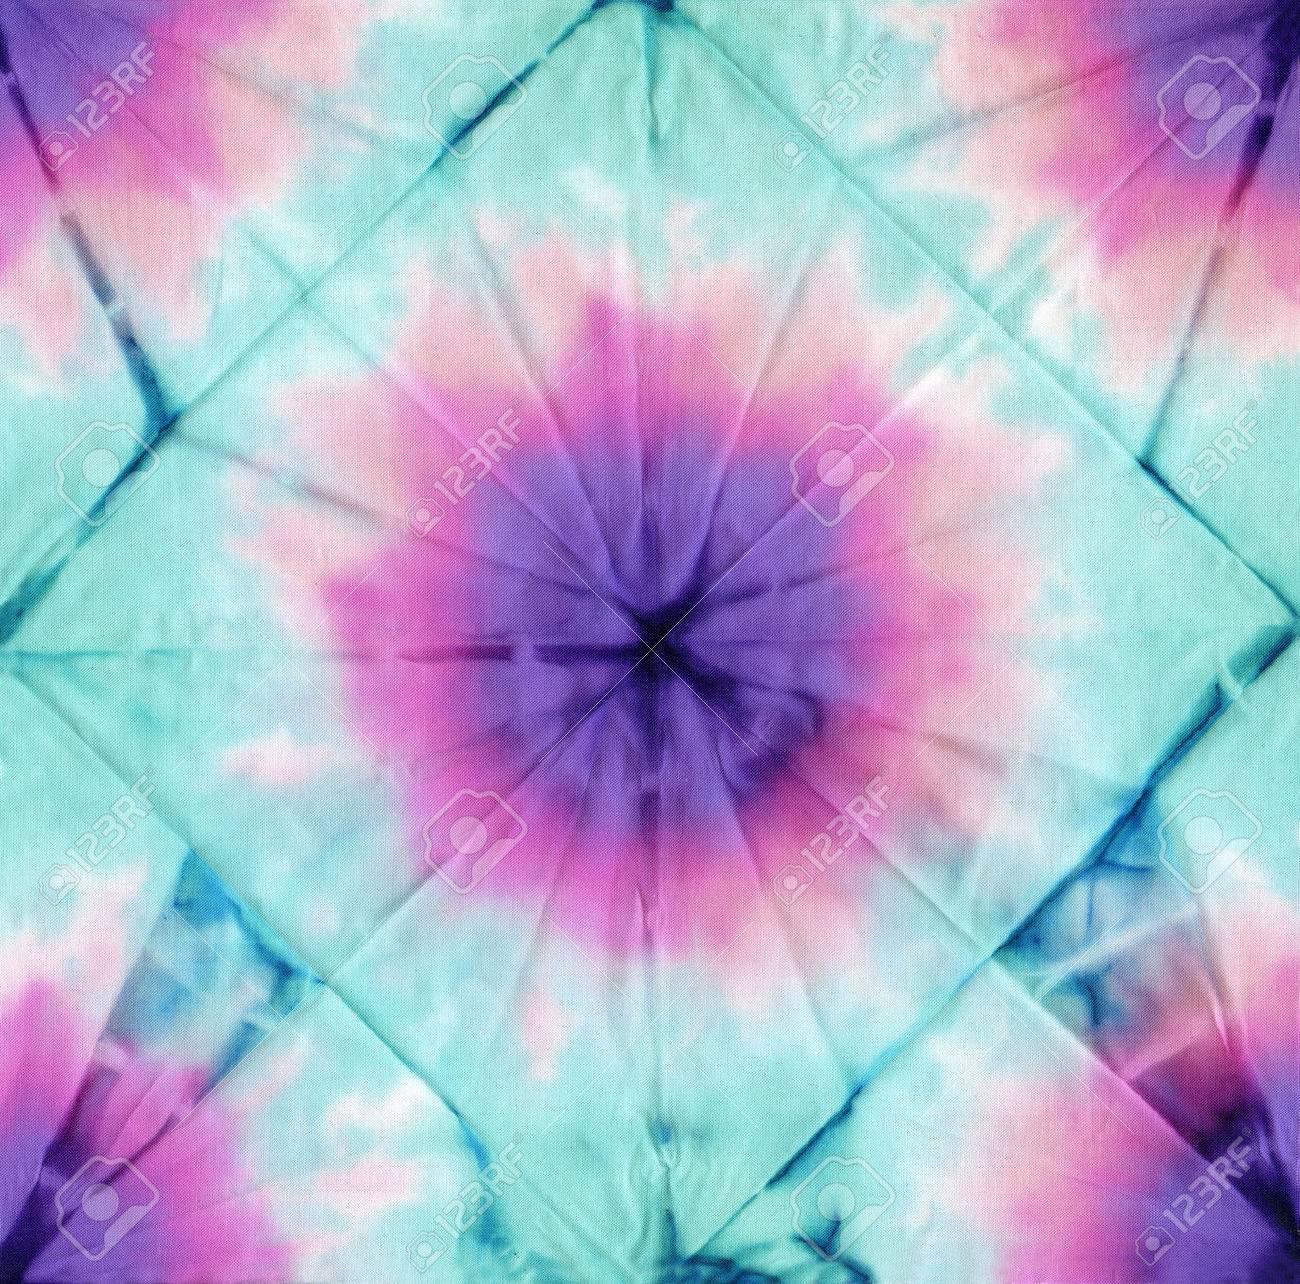 Tie Dye Fabric Texture Background Stock Photo Picture And Royalty